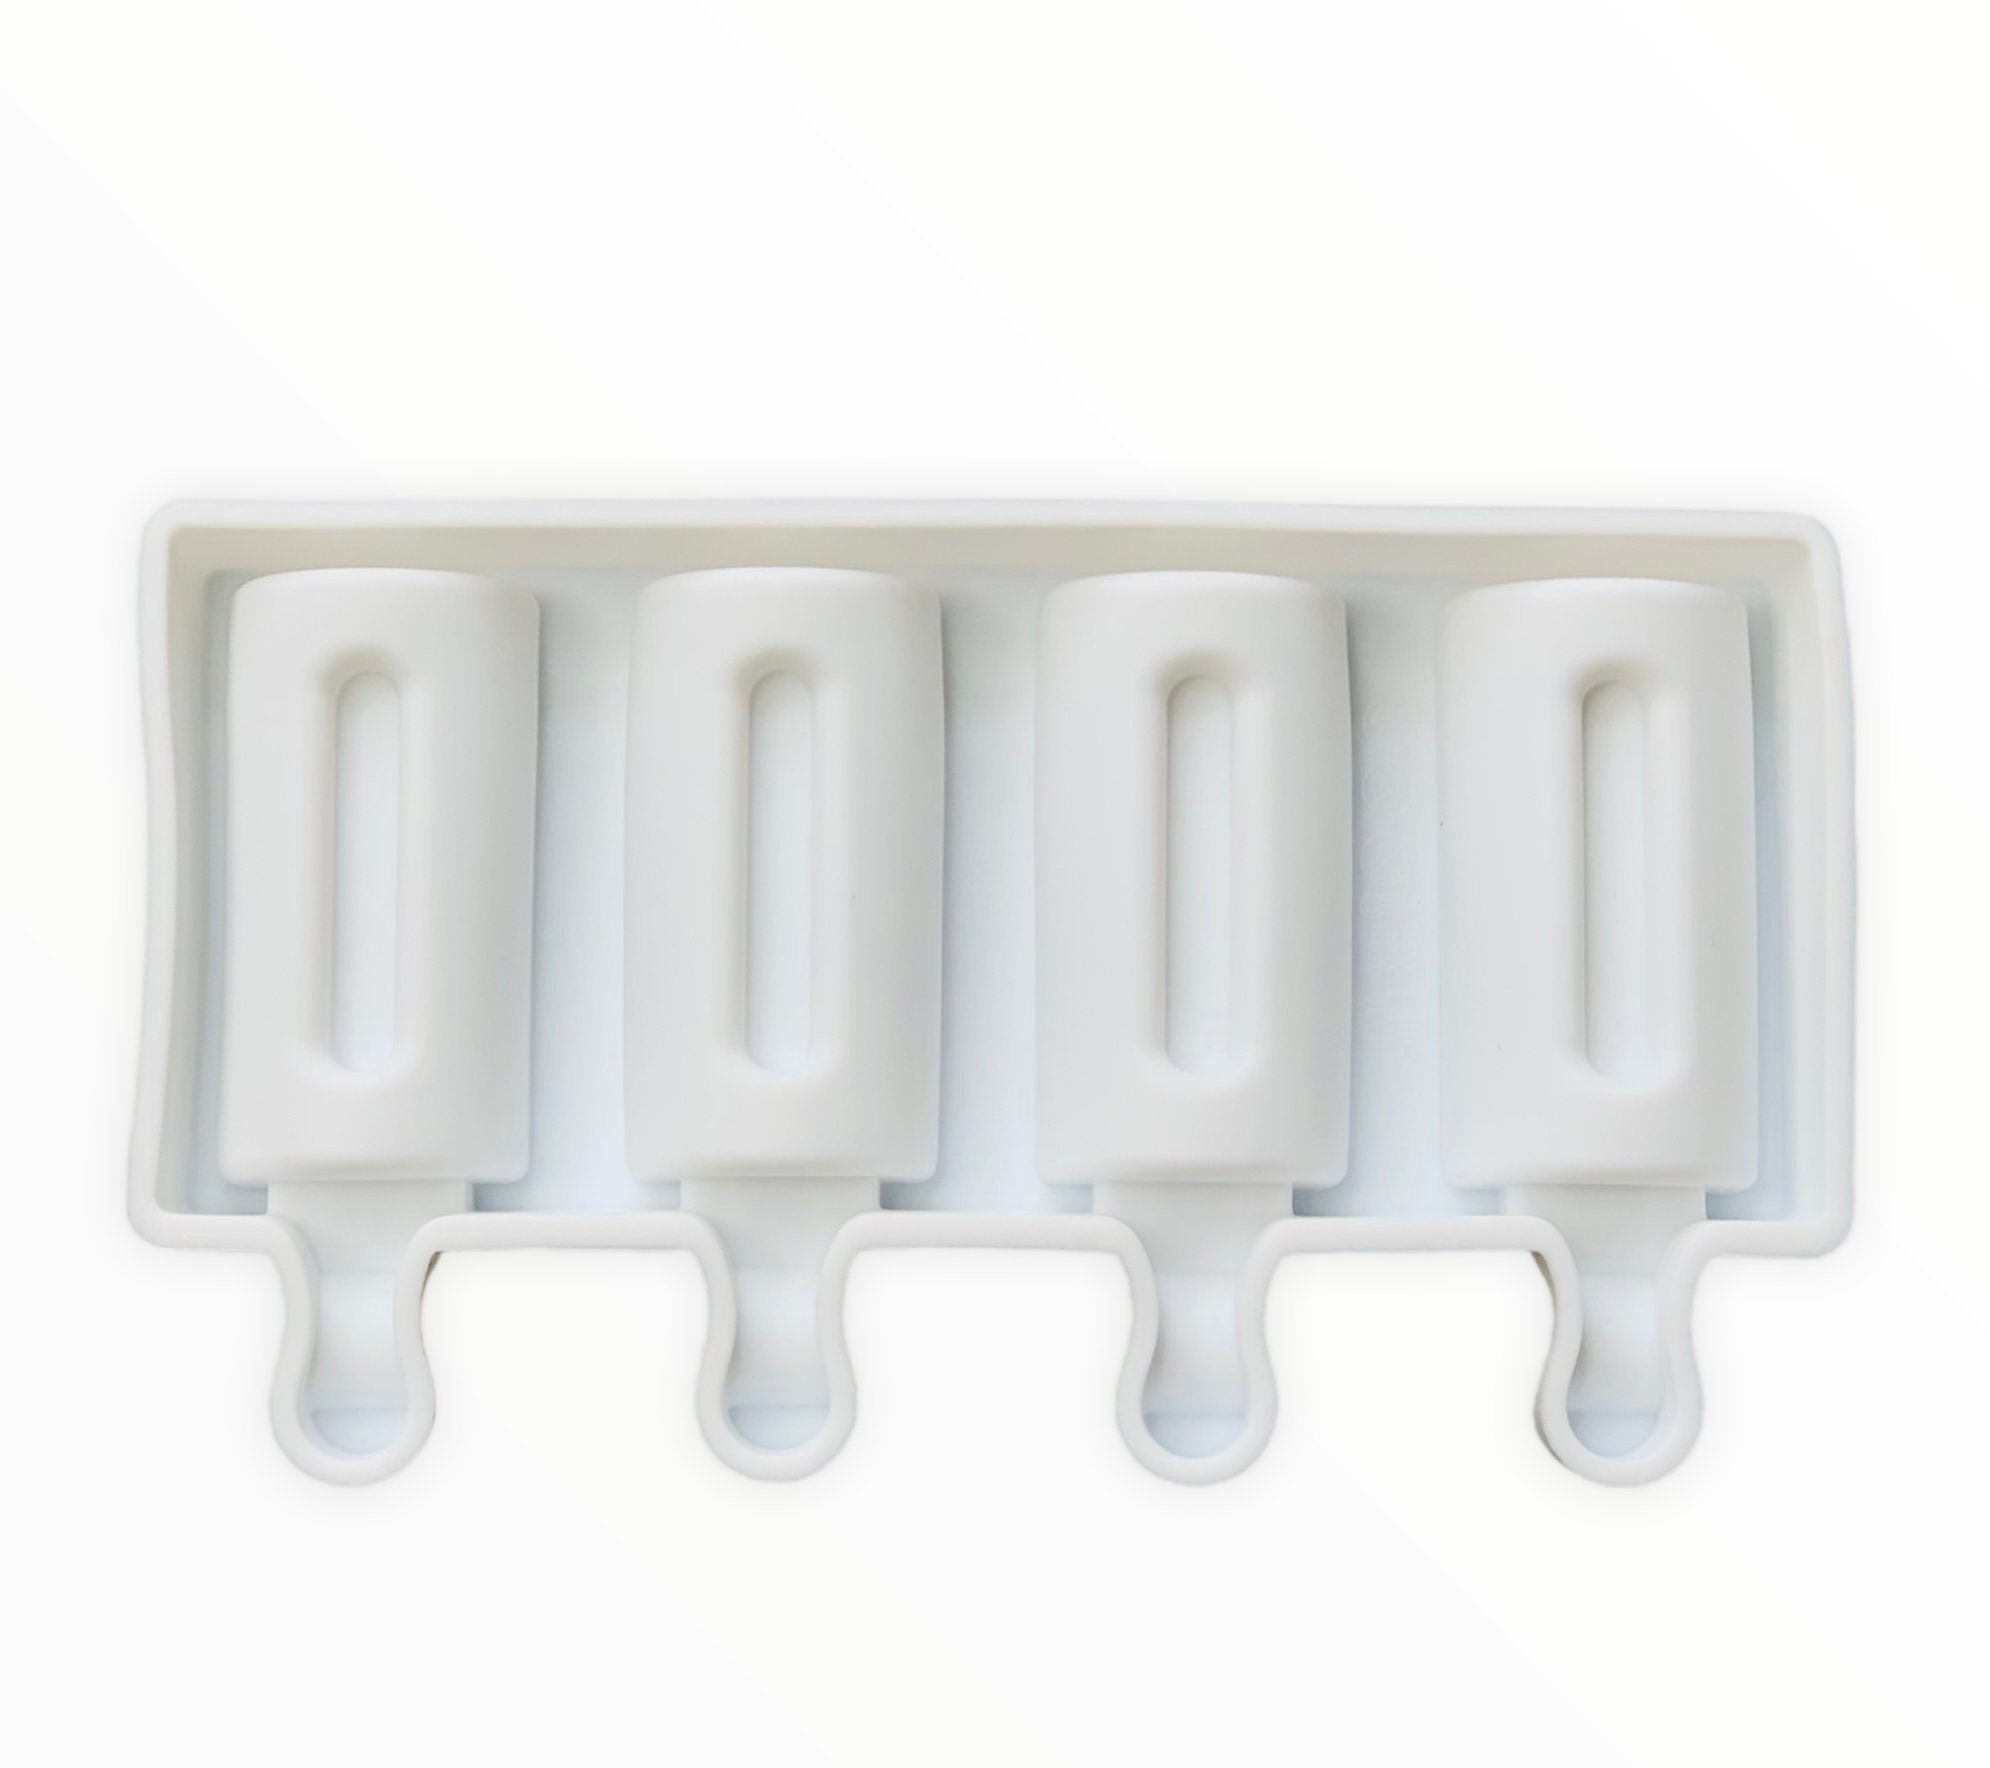 Pastry Tek Silicone Cylinder Popsicle Mold - 4-Compartment - 10 count box